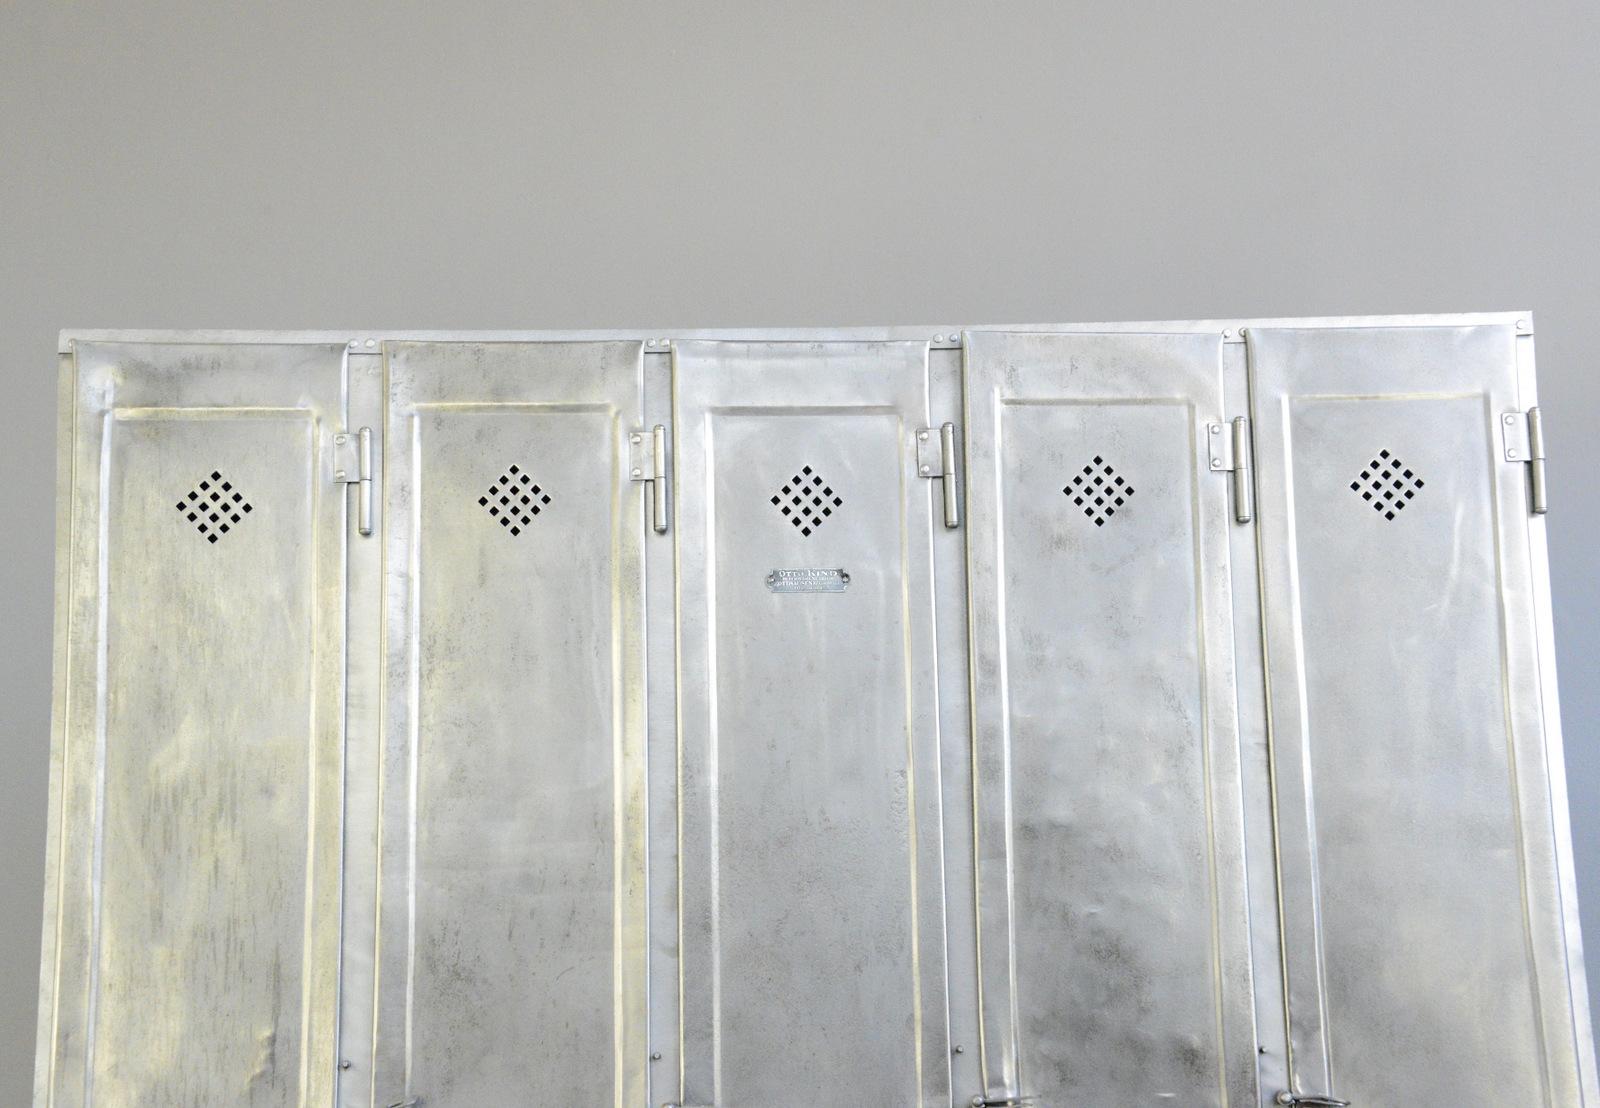 Five-door industrial lockers by Otto Kind, circa 1920s

- Made from sheet steel
- Diamond shaped vents
- 4 hanging hooks and 1 shelf in each compartment
- Made by Otto Kind
- German, 1920s
- measures: 151cm wide x 33cm deep x 175cm